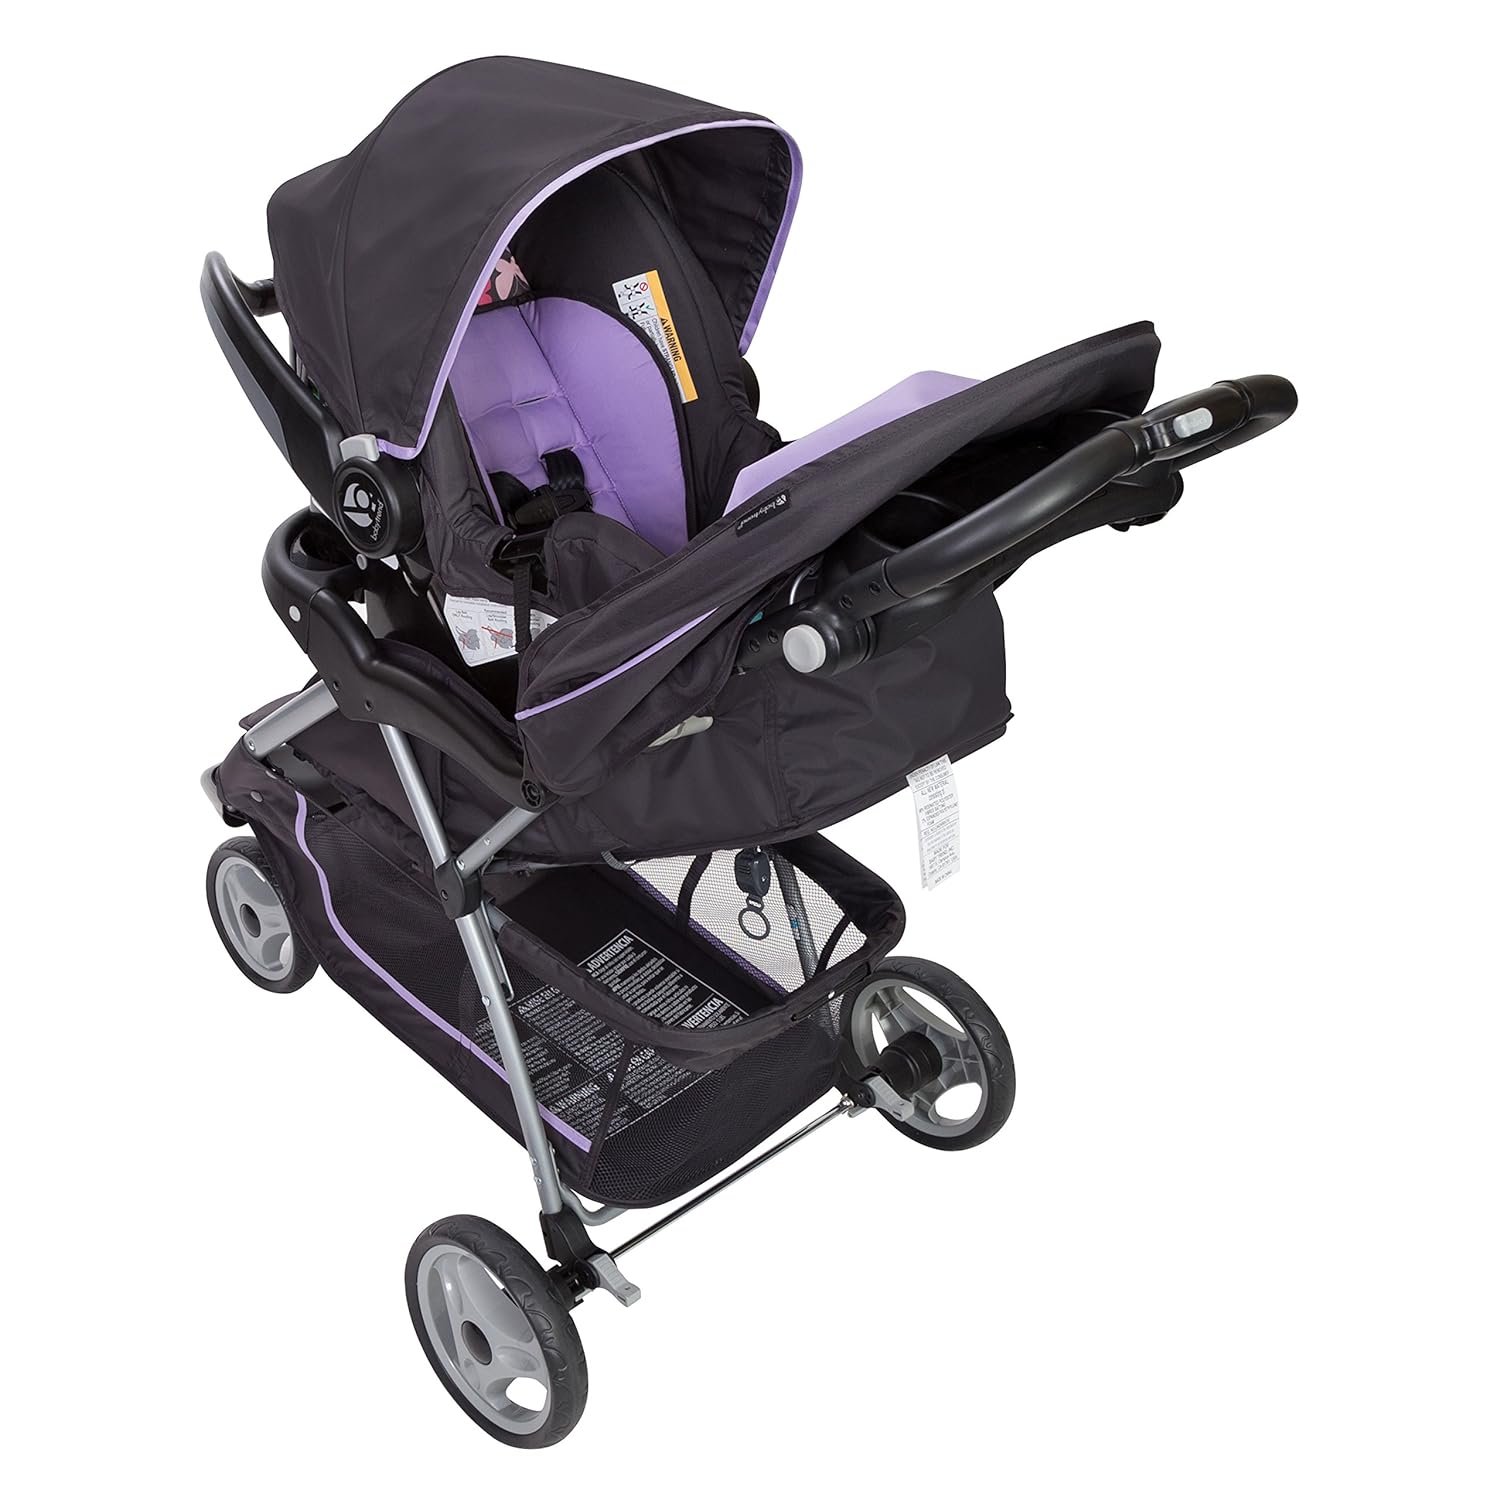 Baby Trend EZ Ride 35 Travel System Review